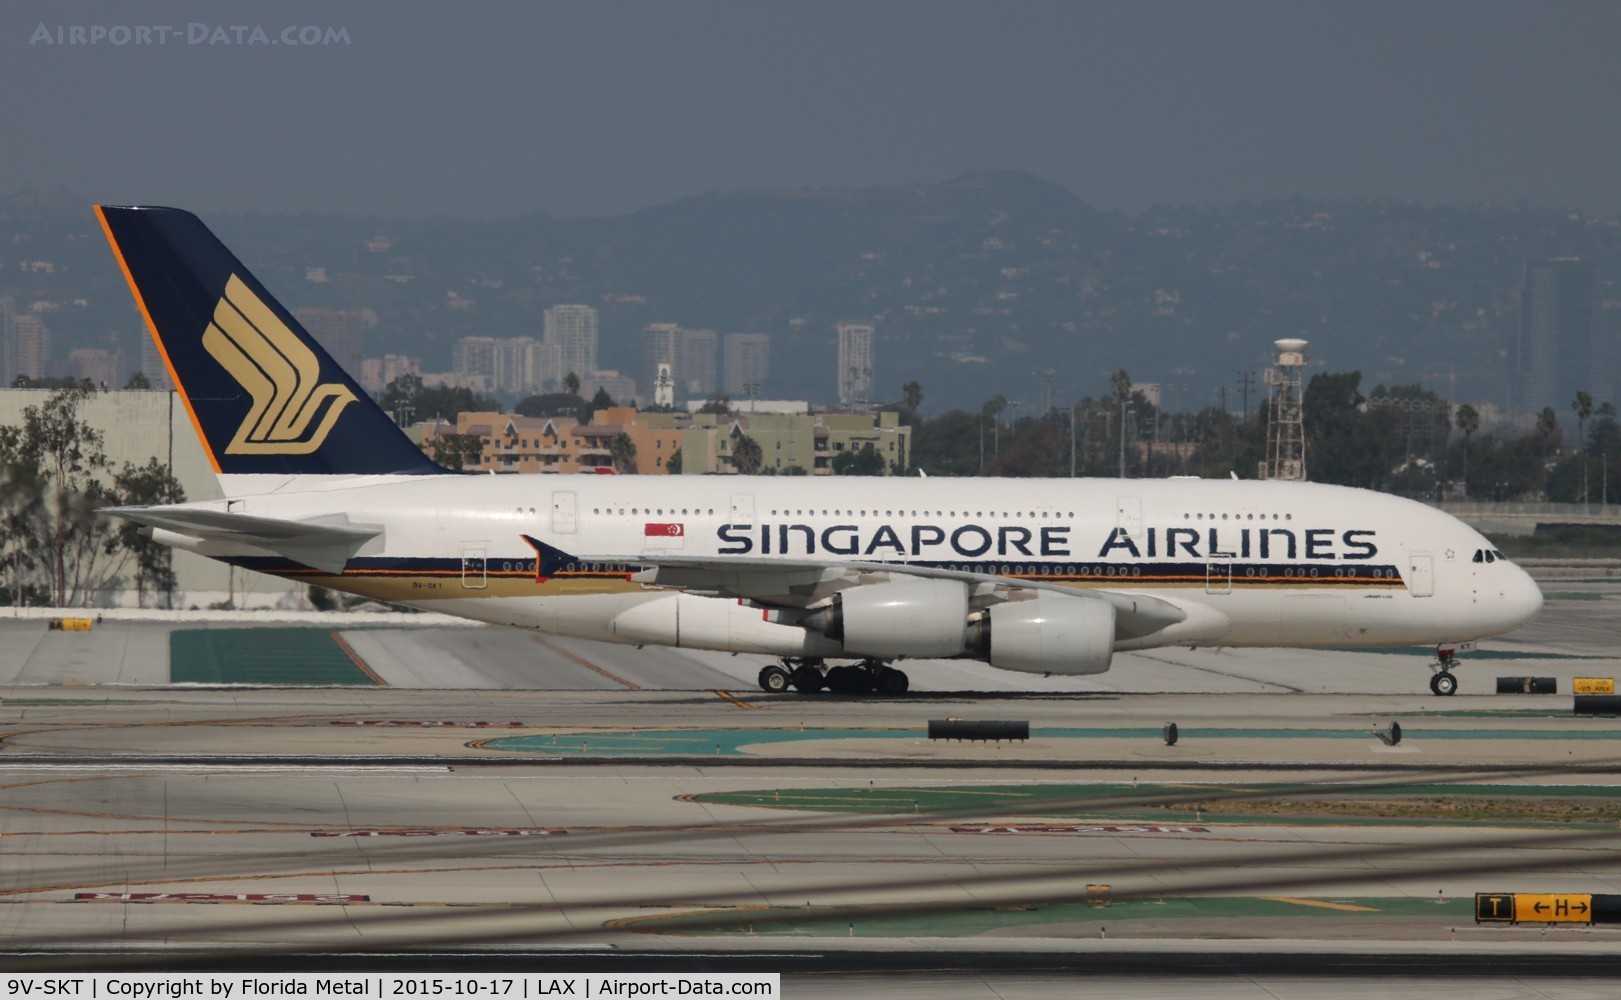 9V-SKT, 2012 Airbus A380-841 C/N 092, Singapore Airlines